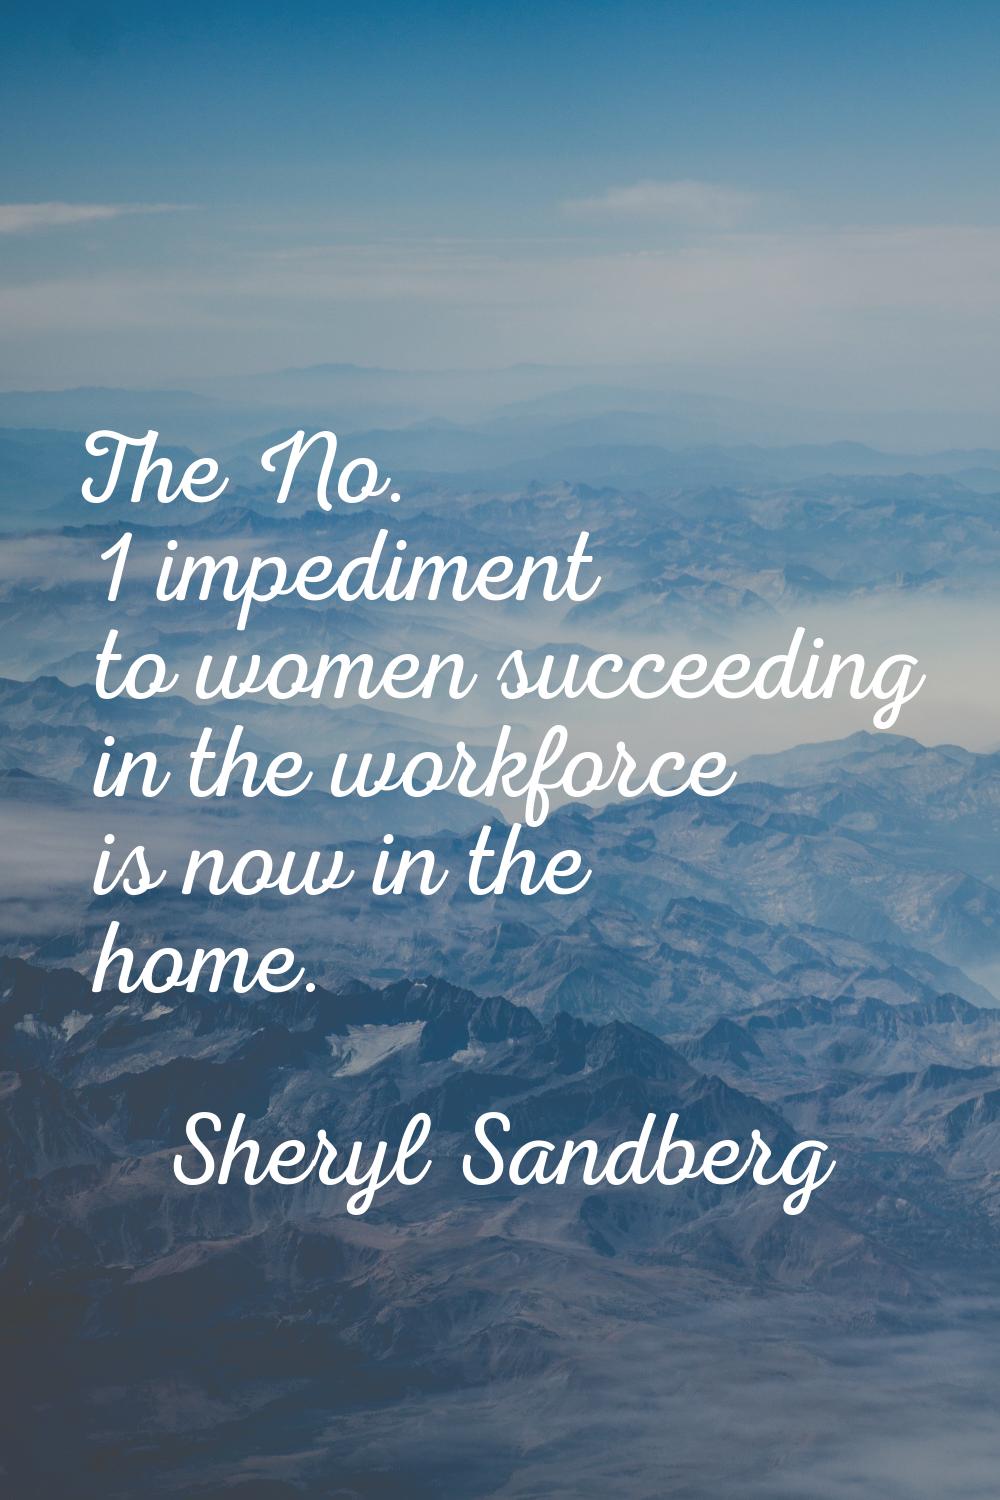 The No. 1 impediment to women succeeding in the workforce is now in the home.